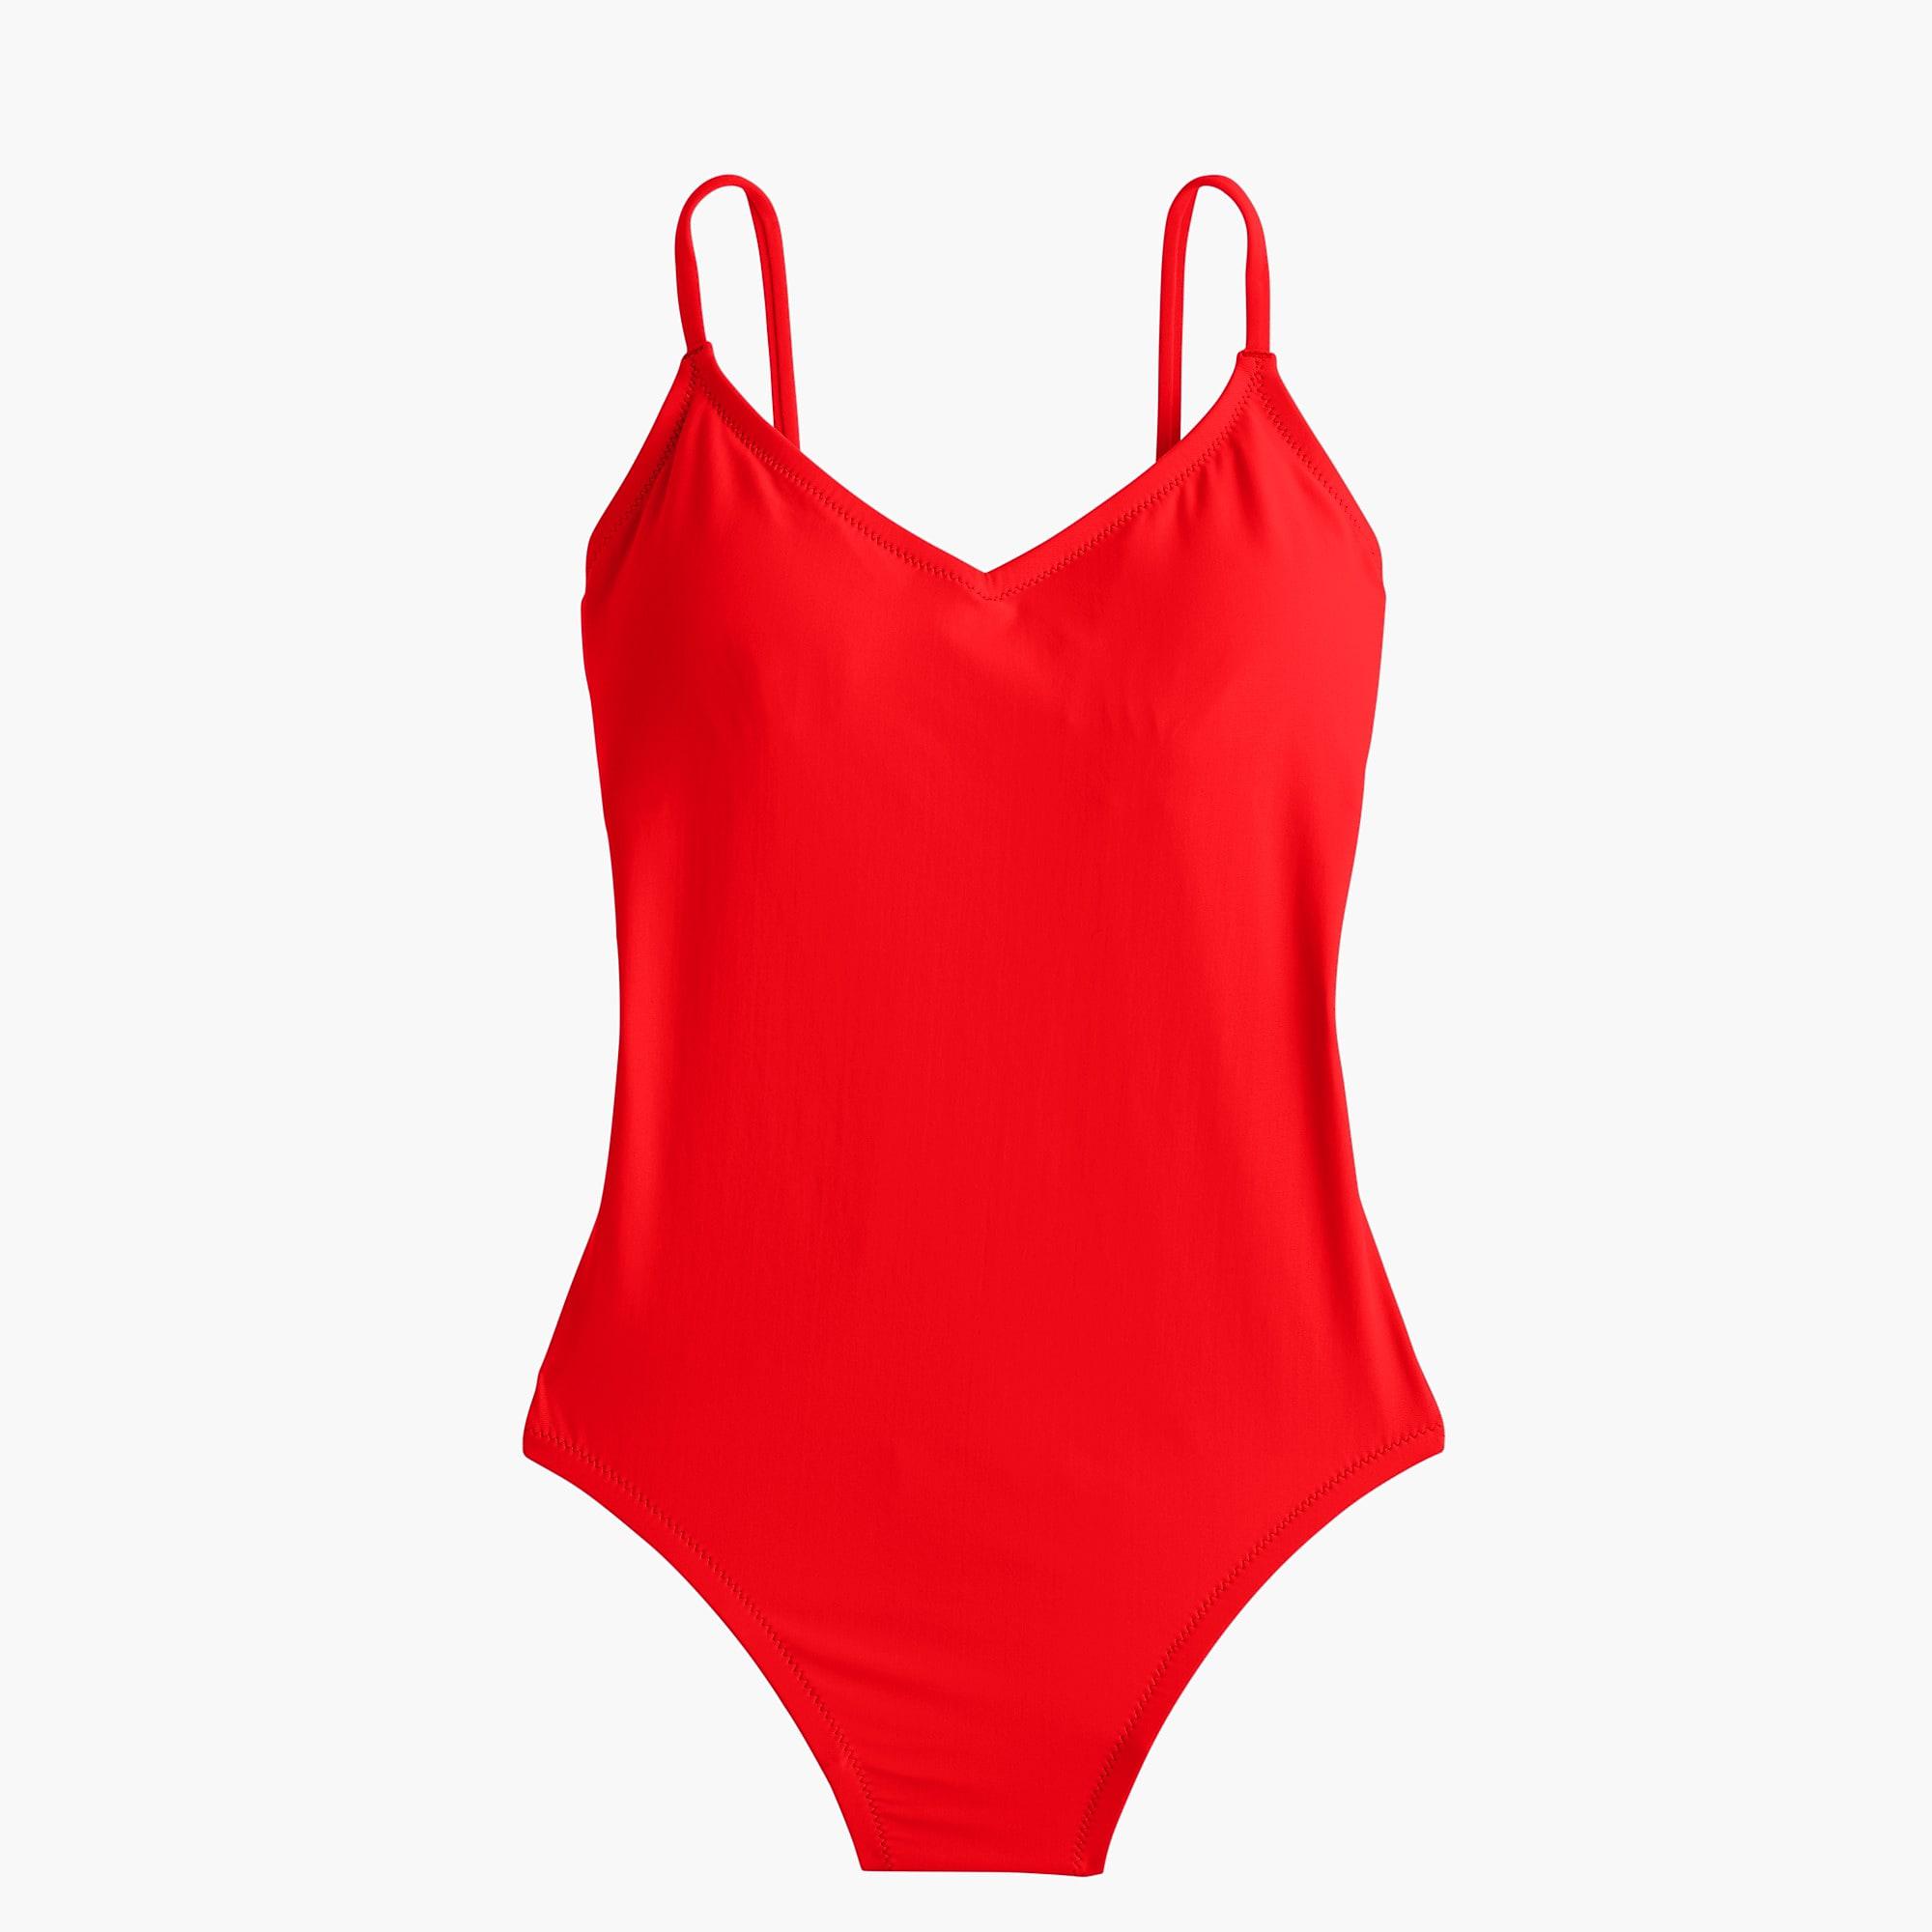 J.Crew Synthetic Ballet One-piece Swimsuit in Bright Cerise (Red ...